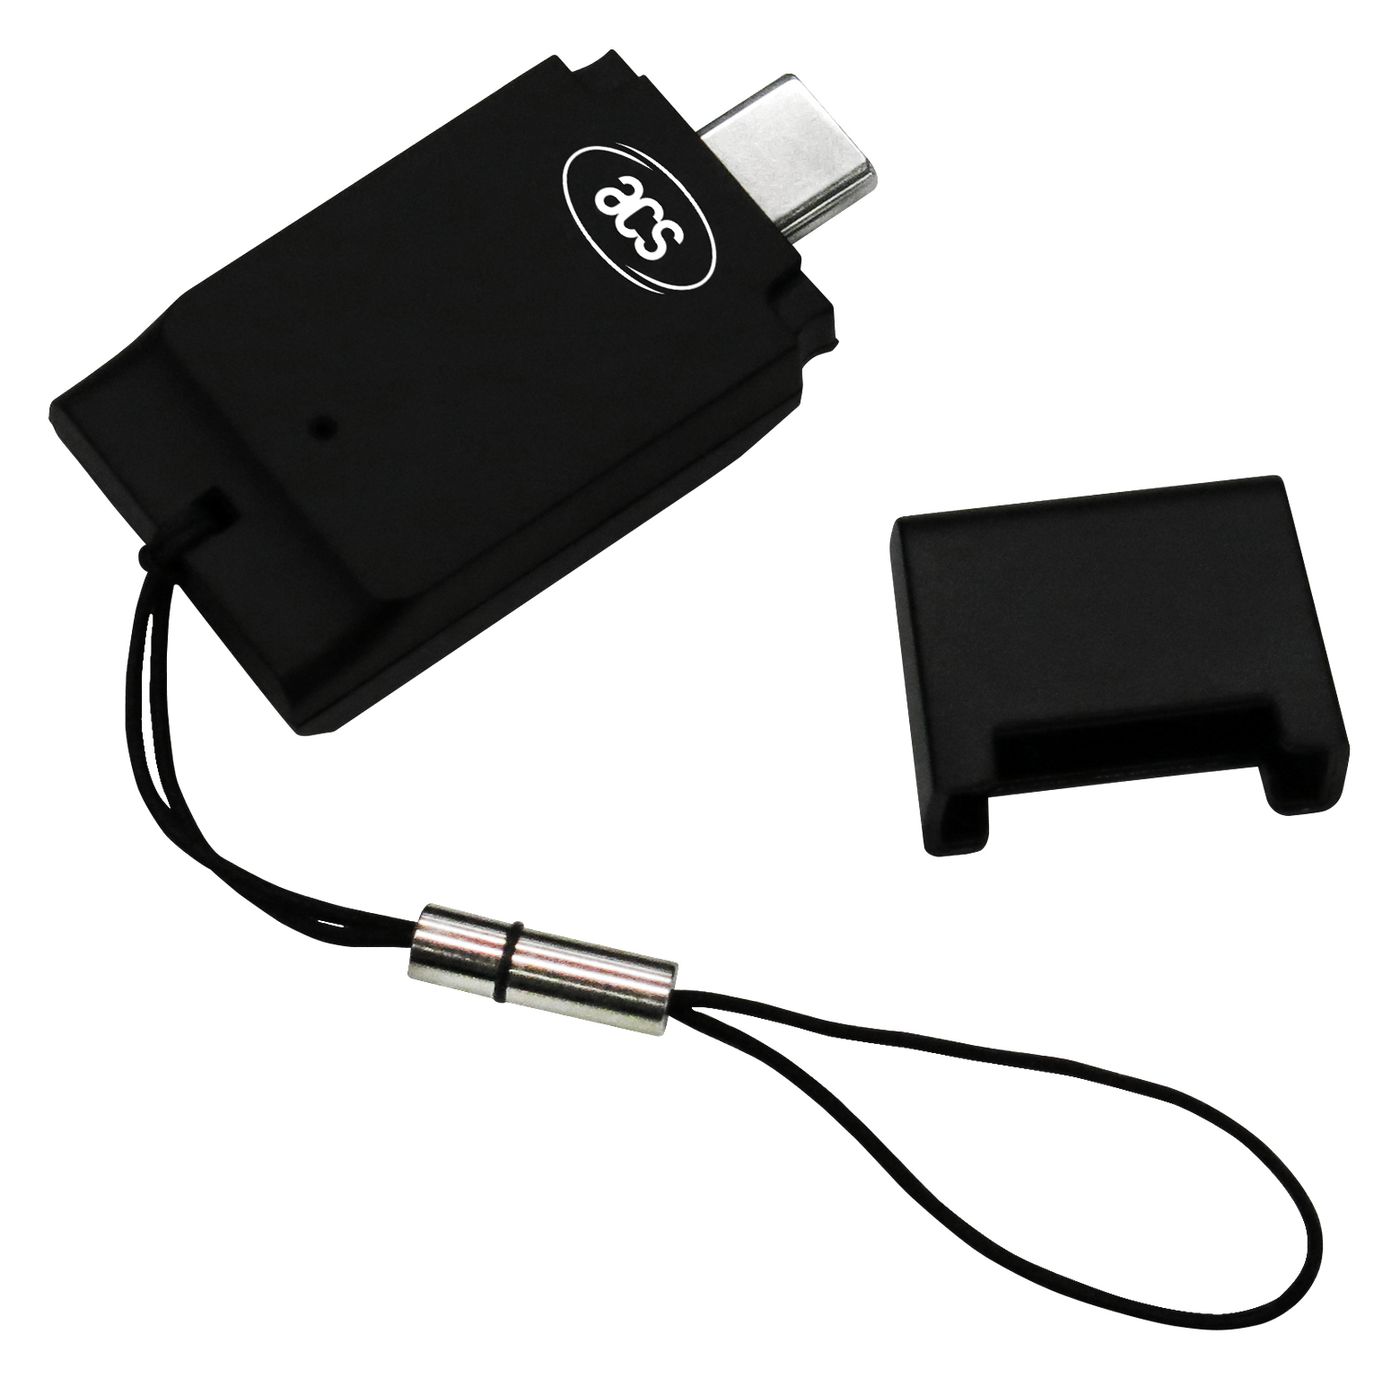 Smart Card Reader - Slim Size - USB Type-c Acr39t-a5